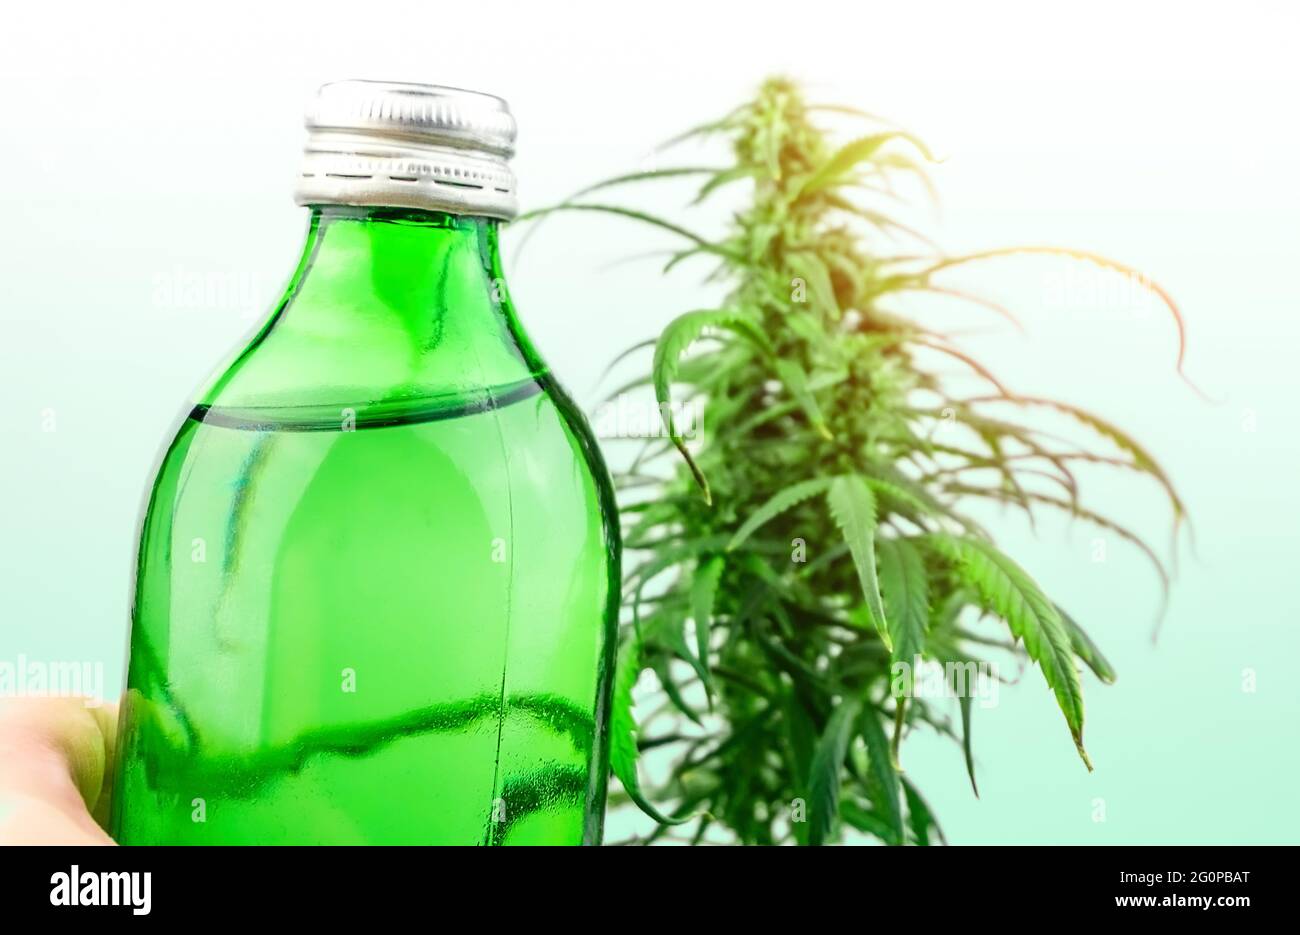 Bottle with CBD cannabis infused drink against cannabis plant, cannabis in food and drink industry Stock Photo